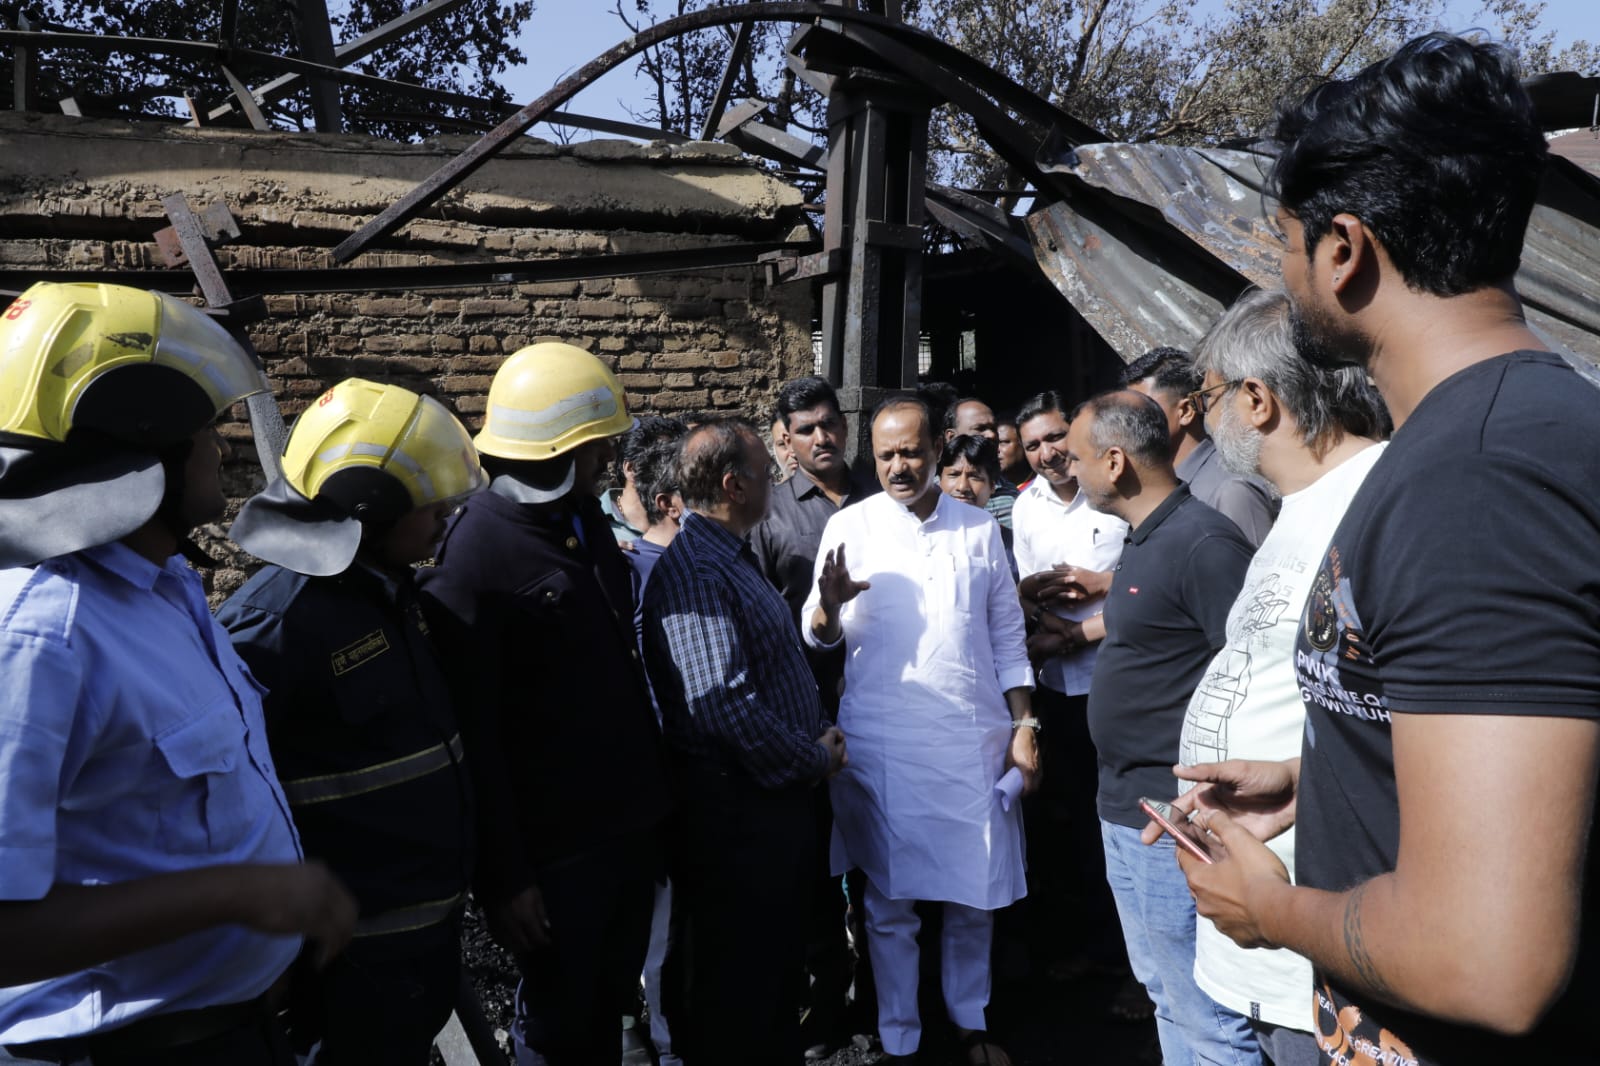 Ajit Pawar visited the accident site in Pune Timber Market today and inspected it